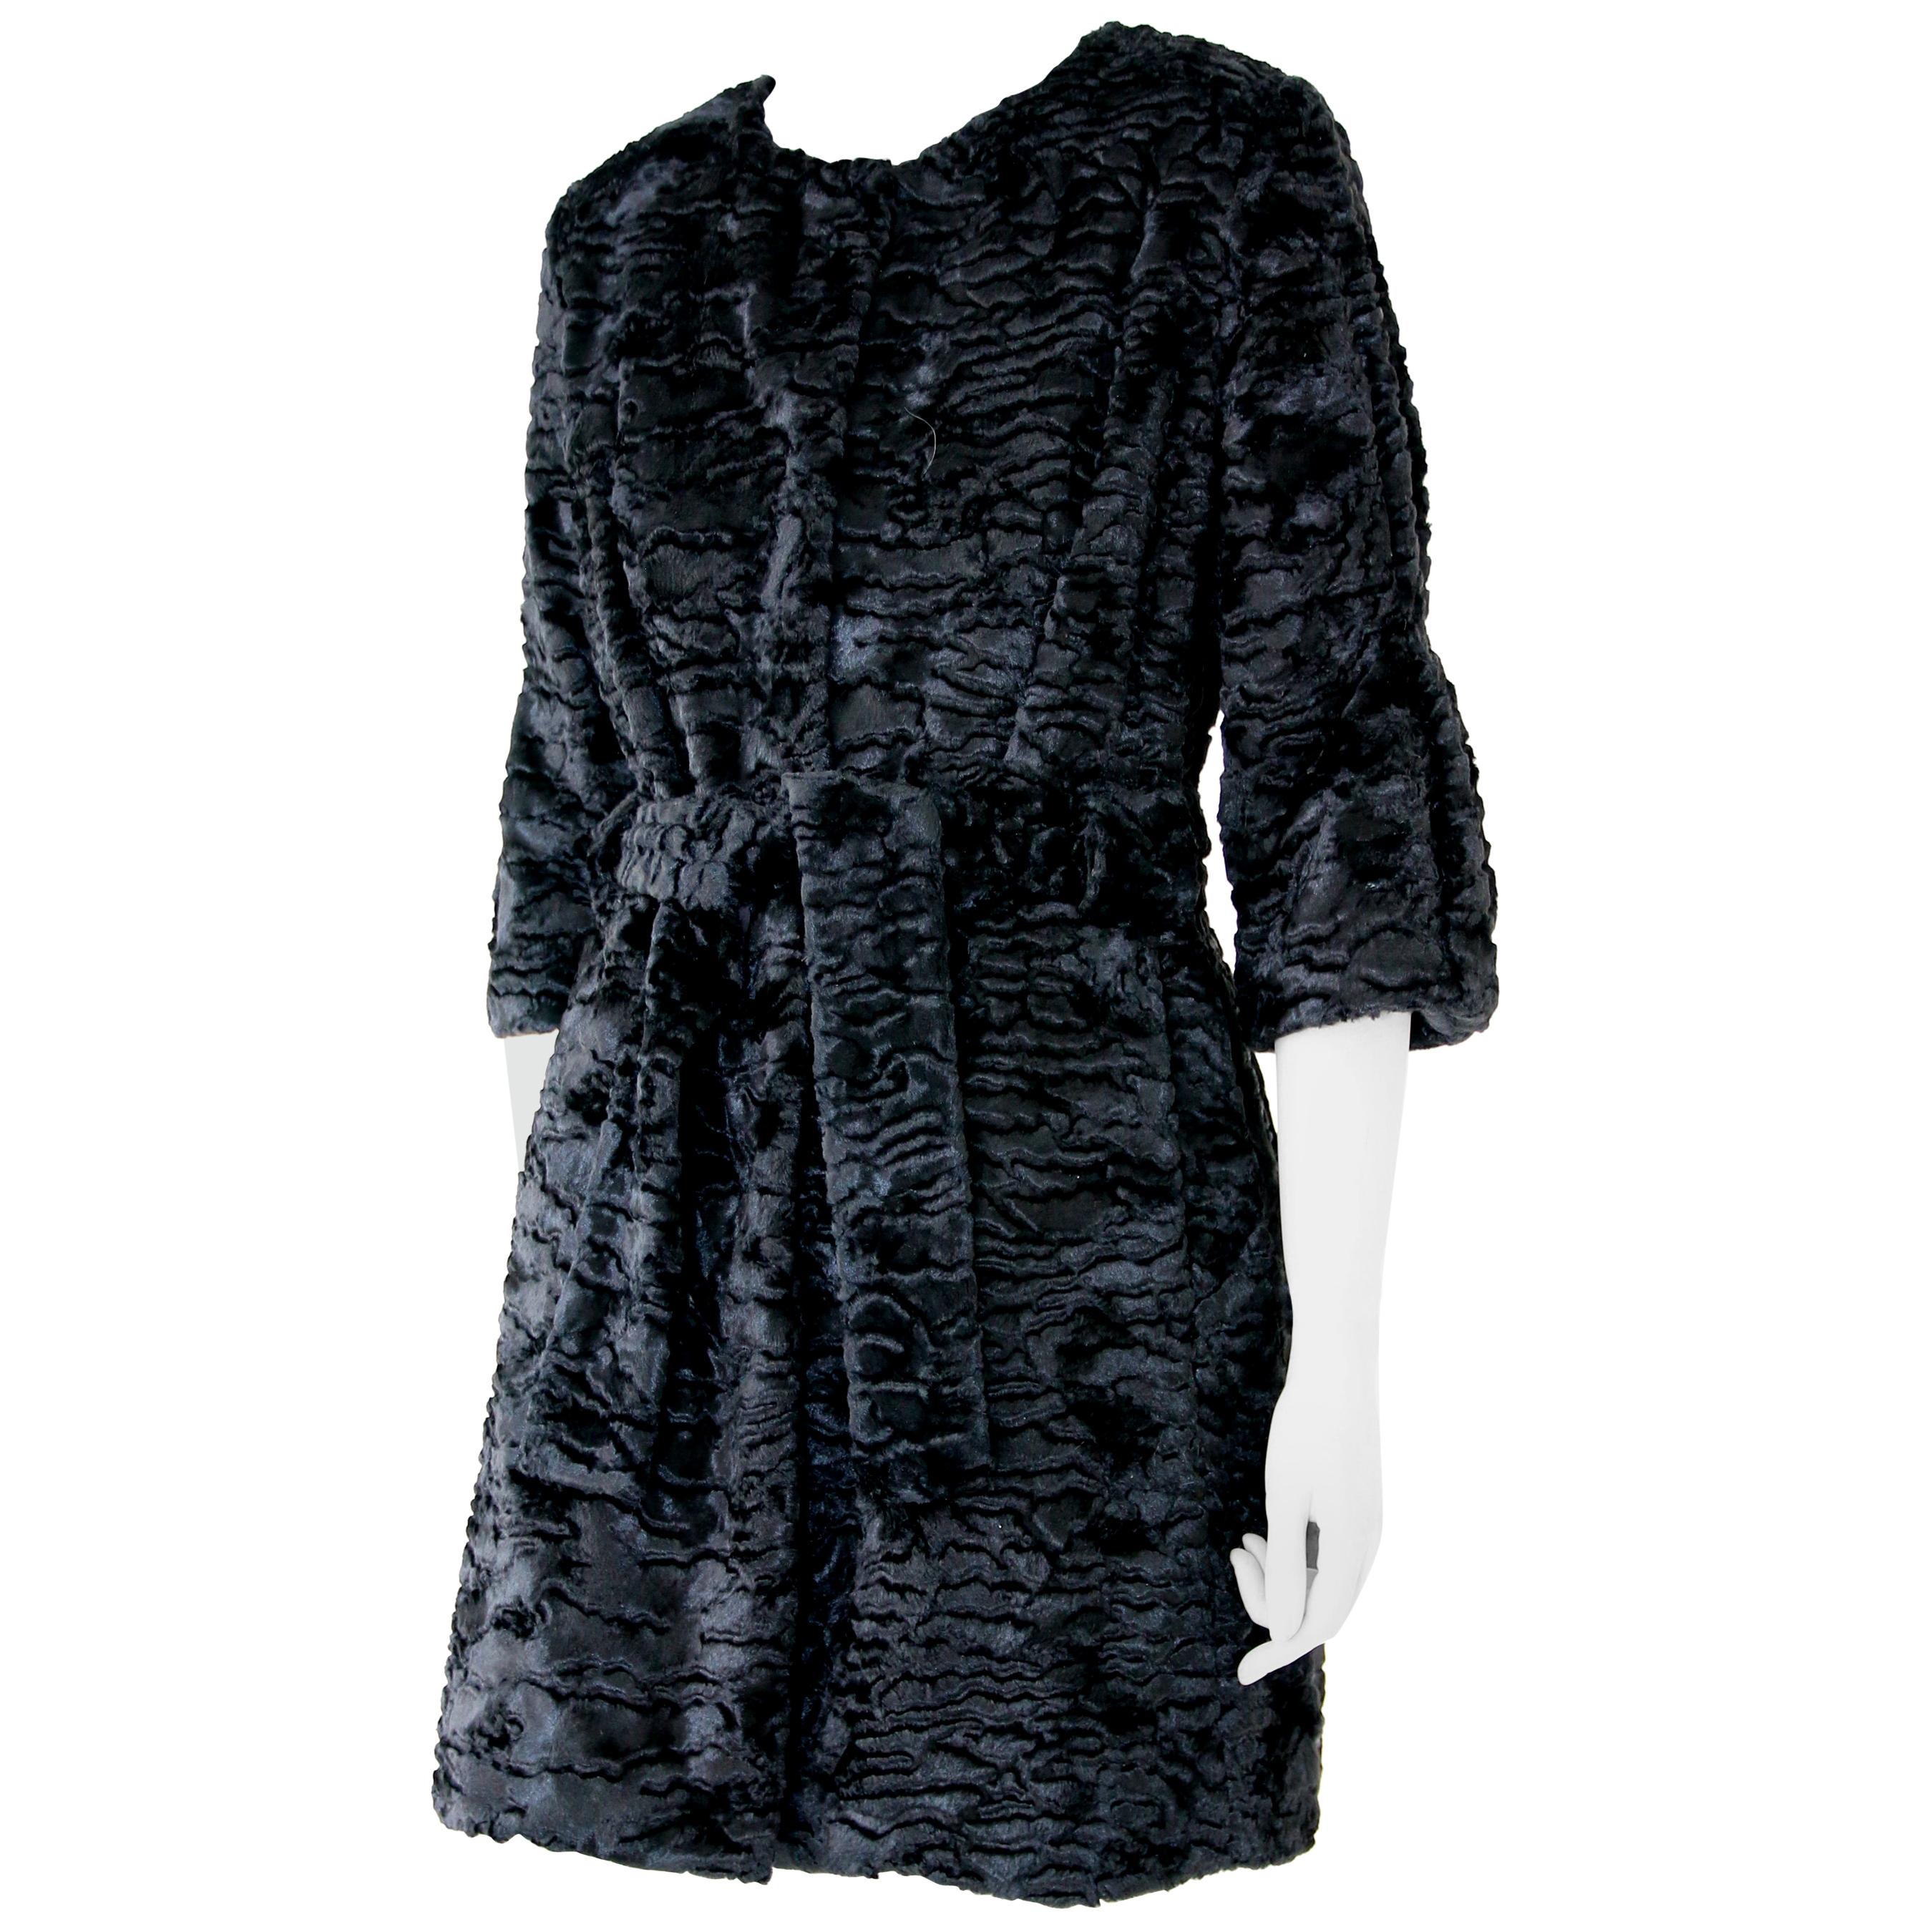 Pelush Black Astrakhan Faux Fur Coat With Belt - Small -  (1/M Available) For Sale